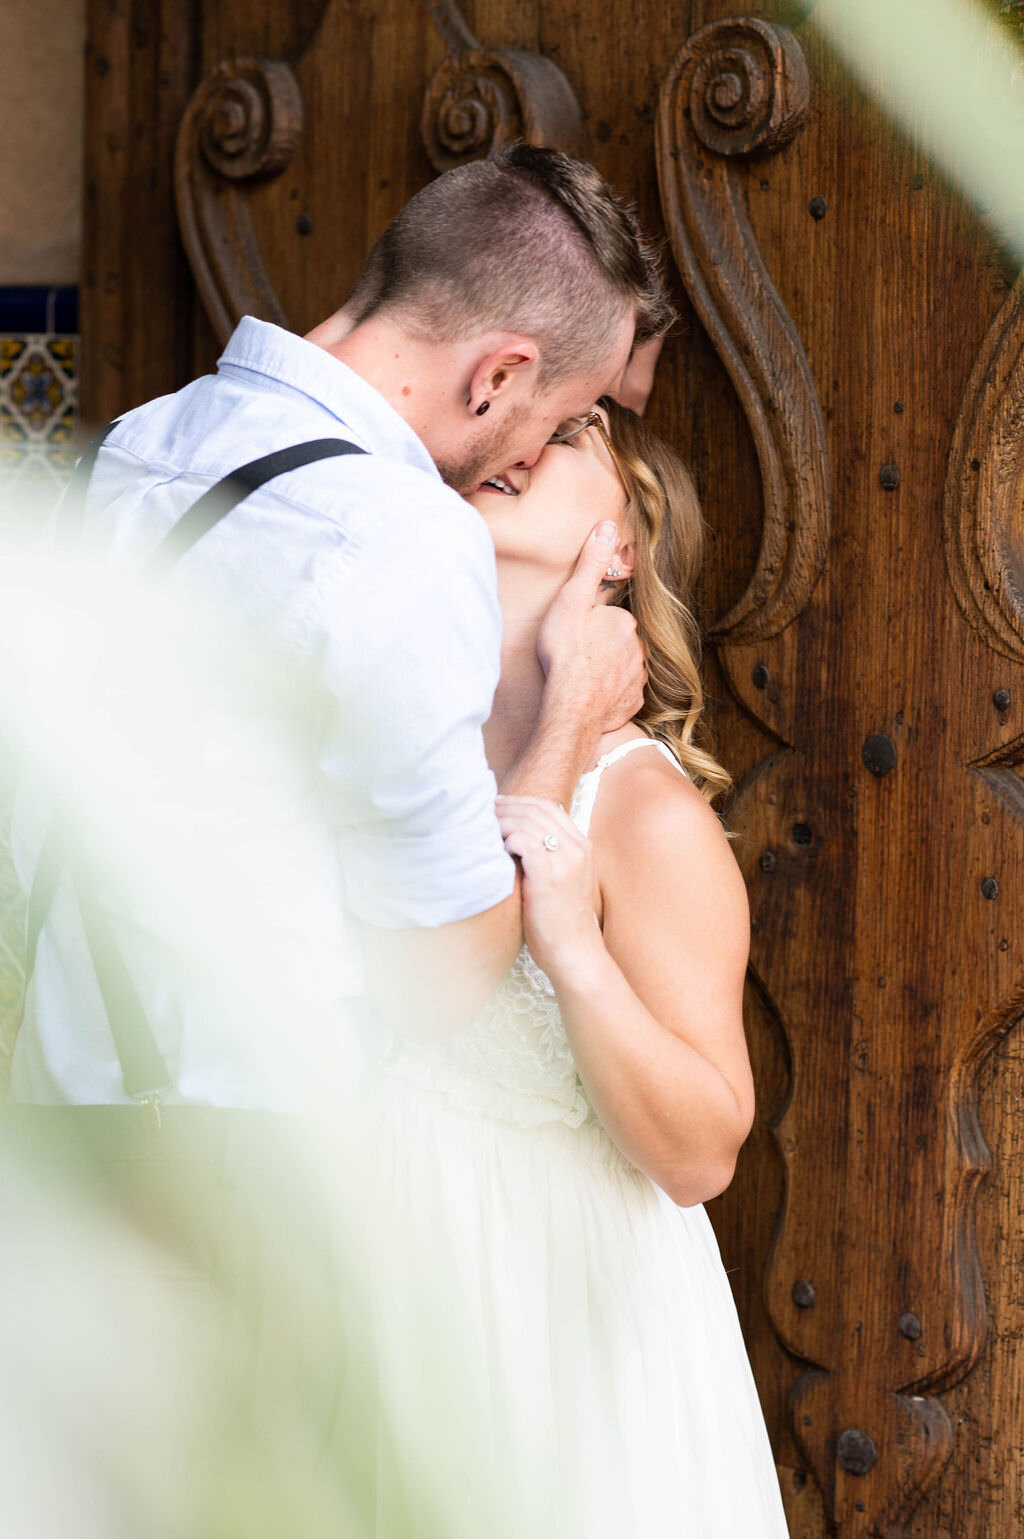 A wedding couple about to kiss while standing next to a wooden door.